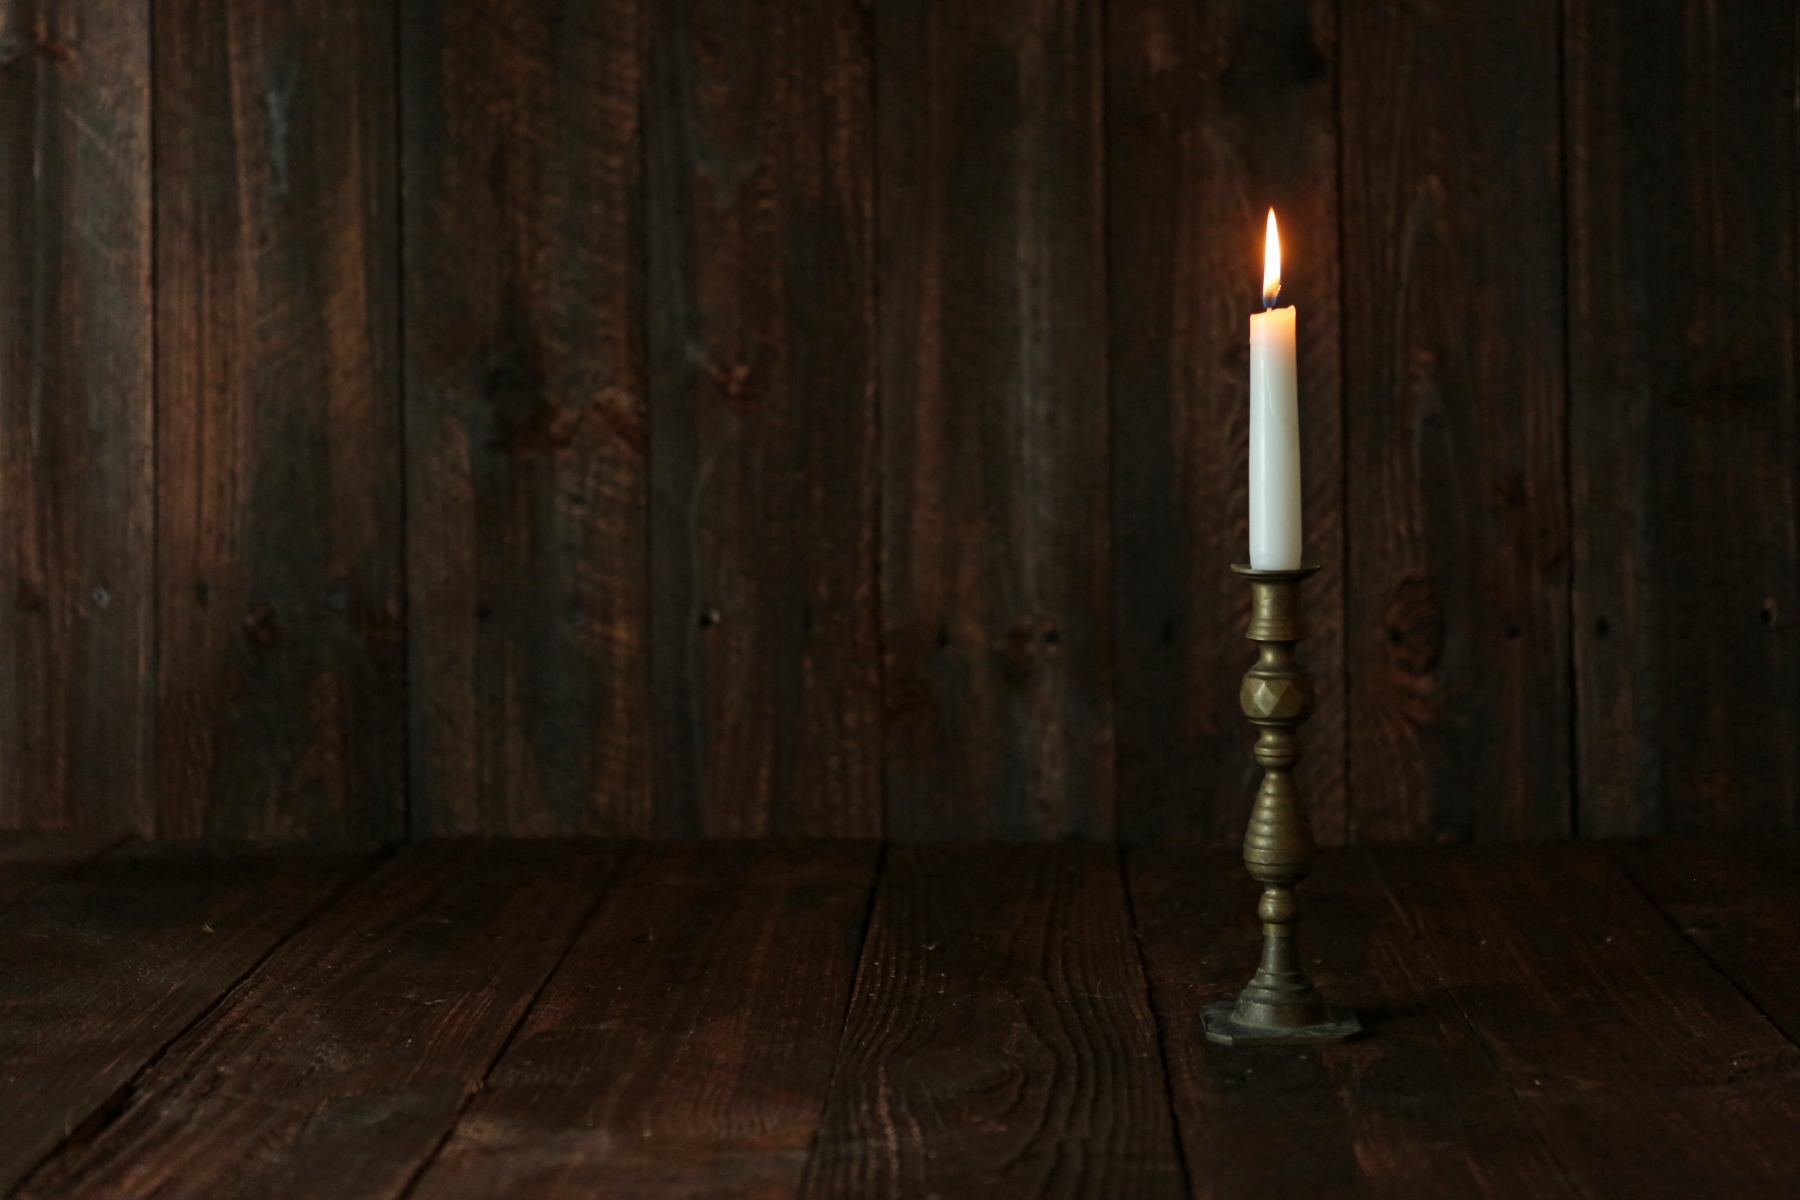 6971652-lit-candle-on-an-old-wooden-rustic-background